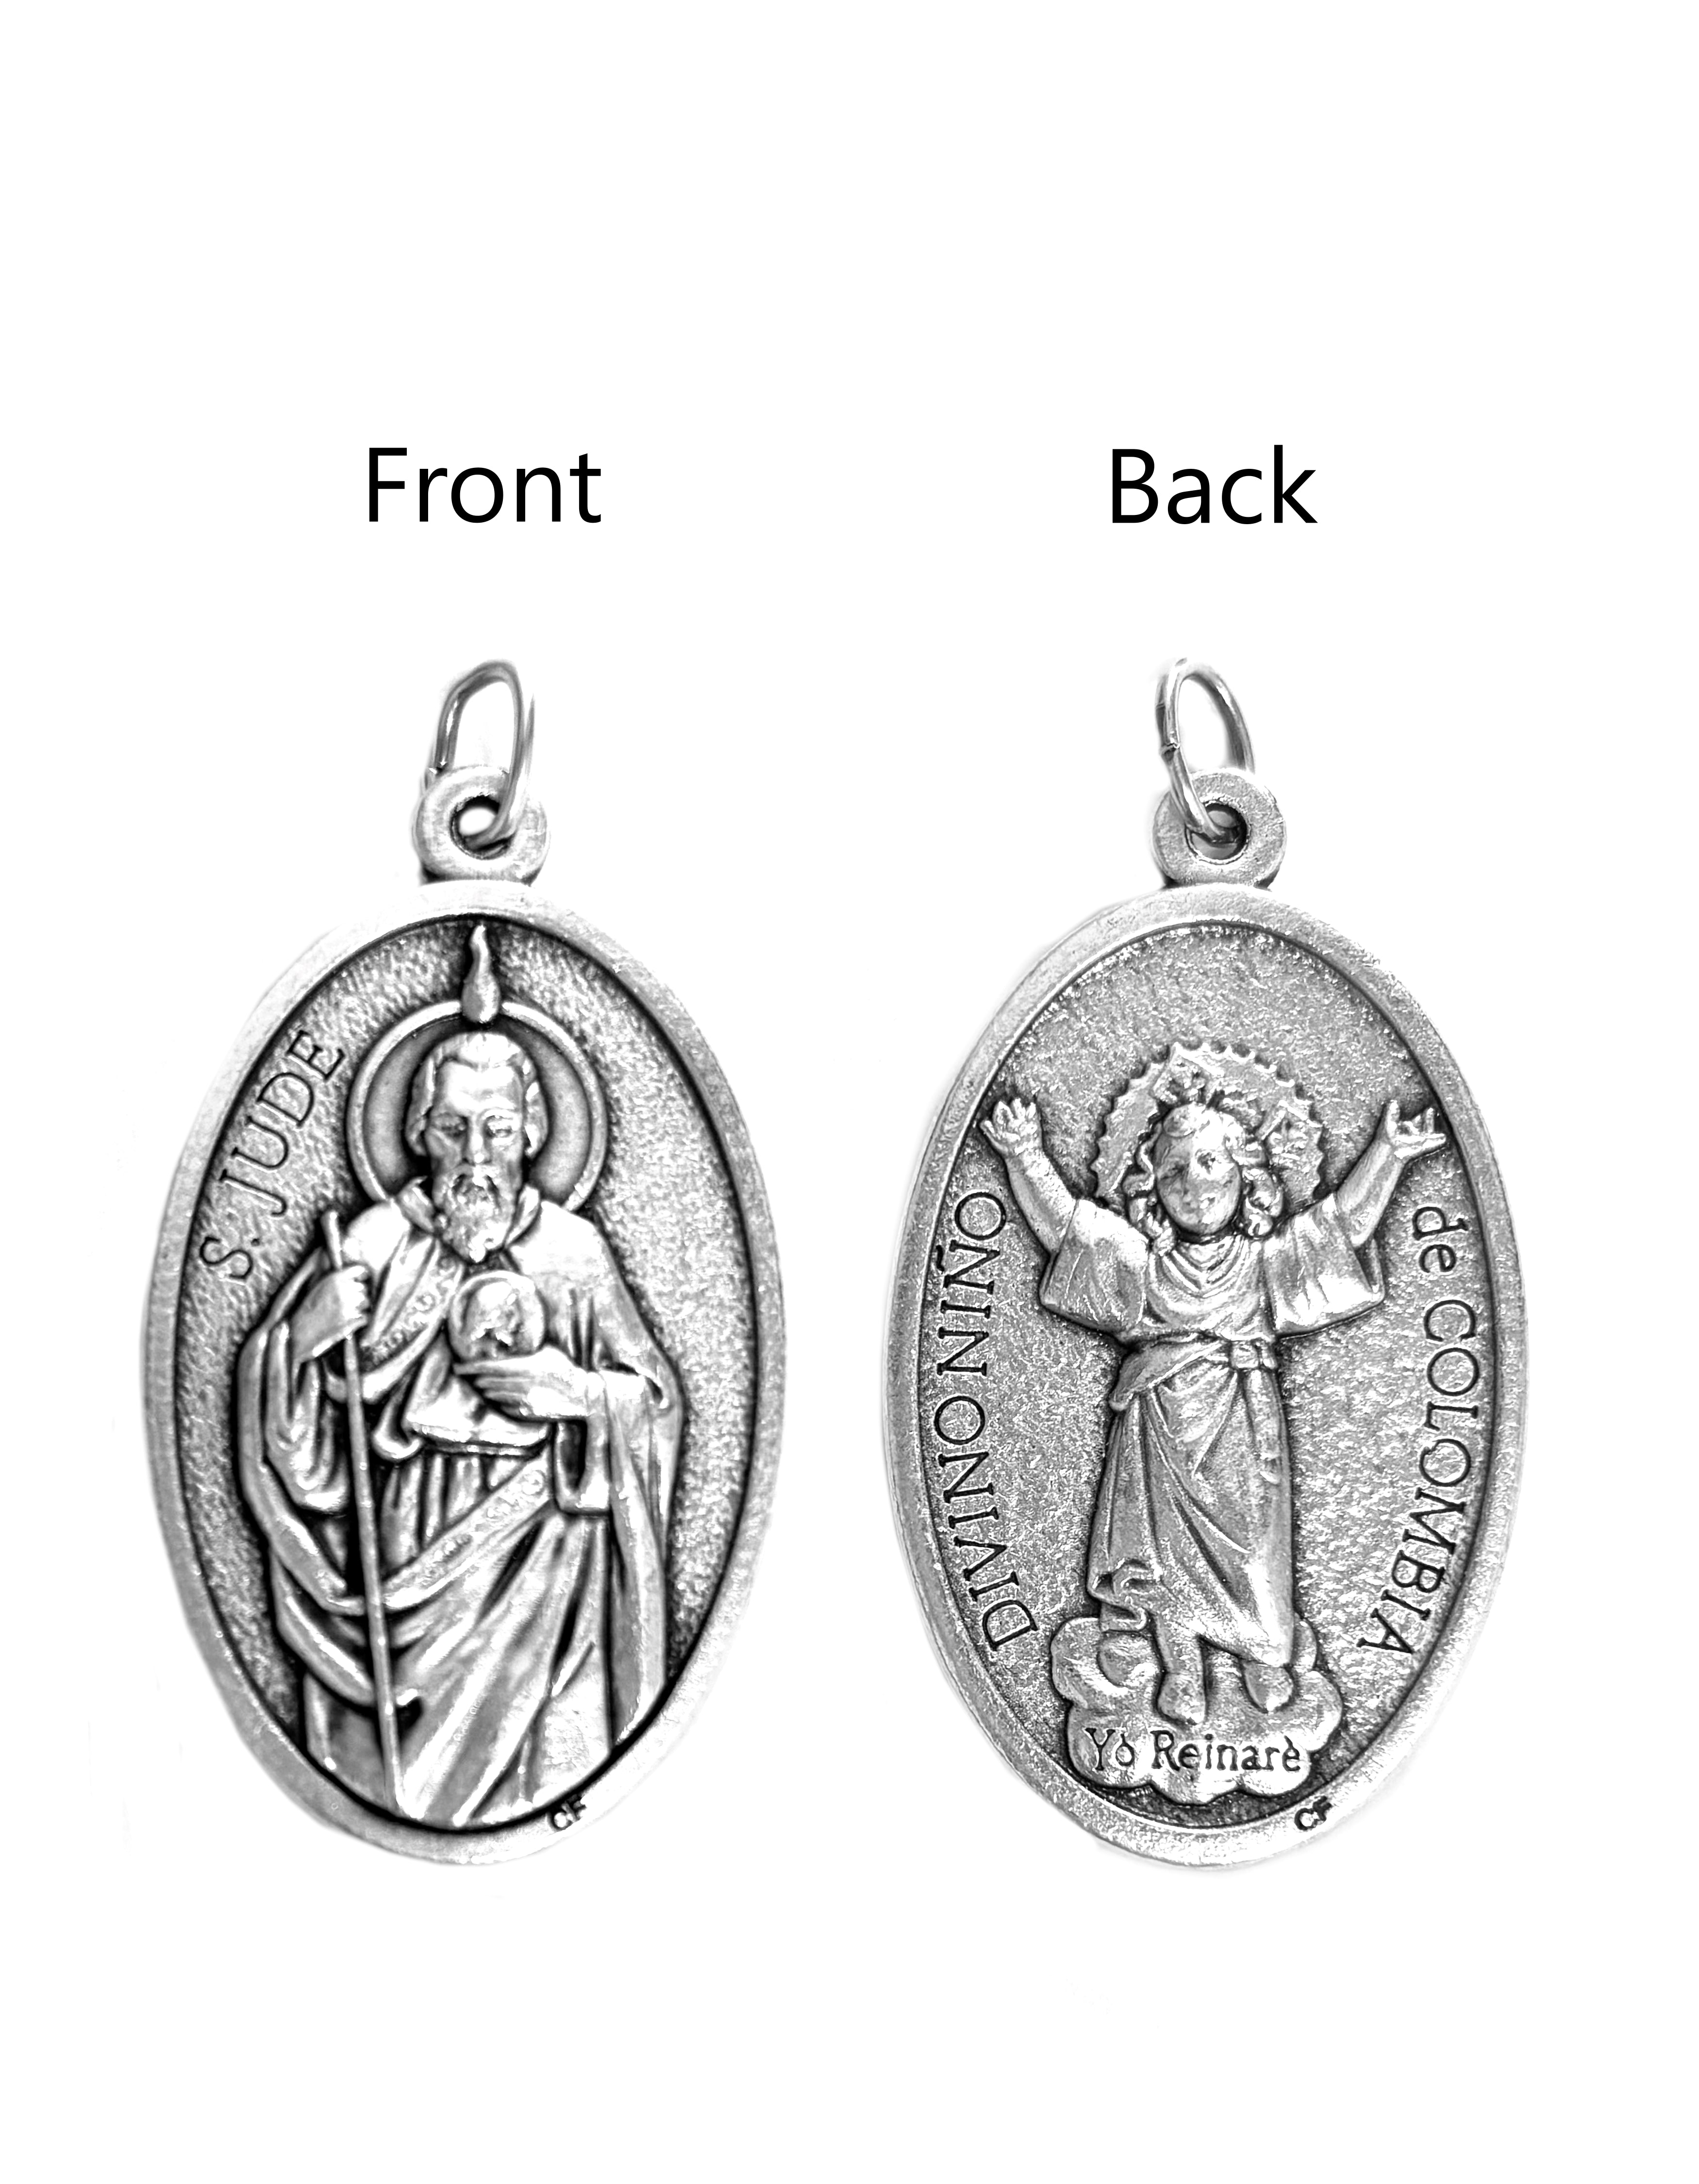 Saints Medals in oxidized silver made in Italy 1.5" x 1.0"